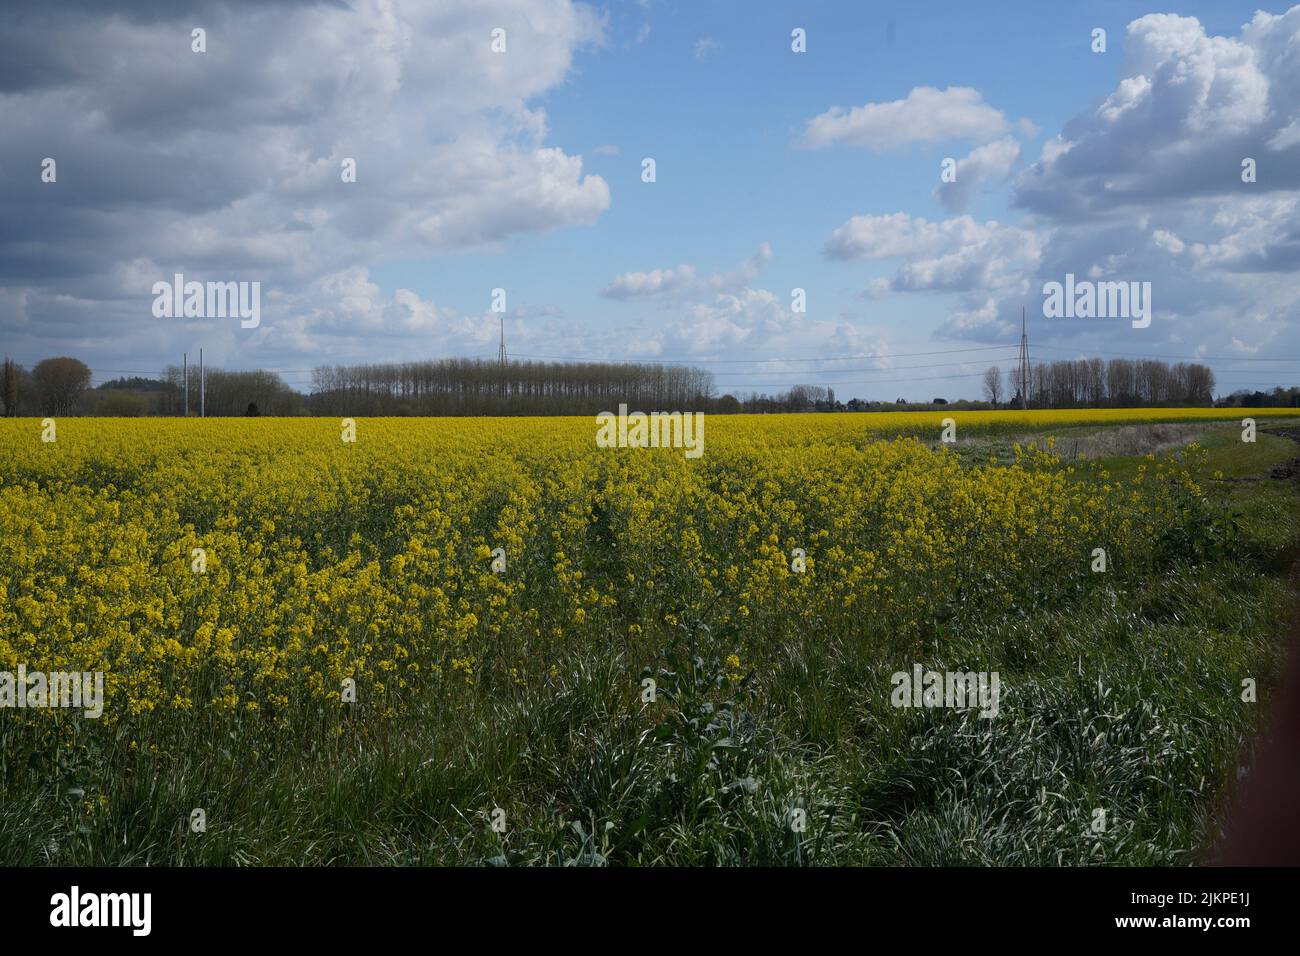 A closeup of a field with vibrant yellow flowers Stock Photo